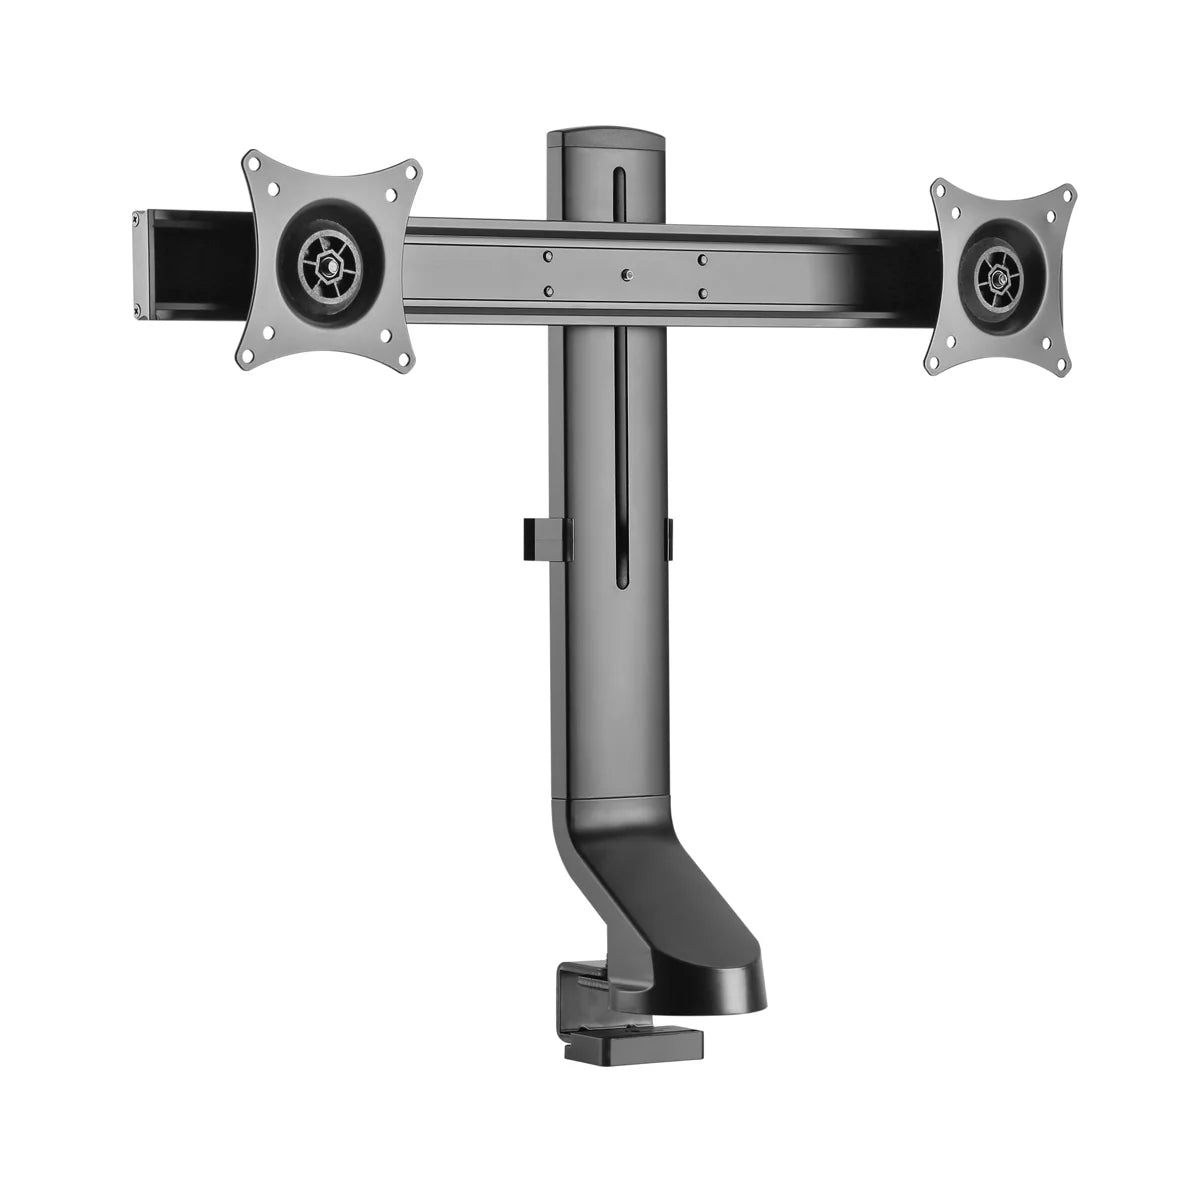 SkillTech - SH 21 C02 - Dual Screen Sit-Stand Workstation Compatible Monitor Arm